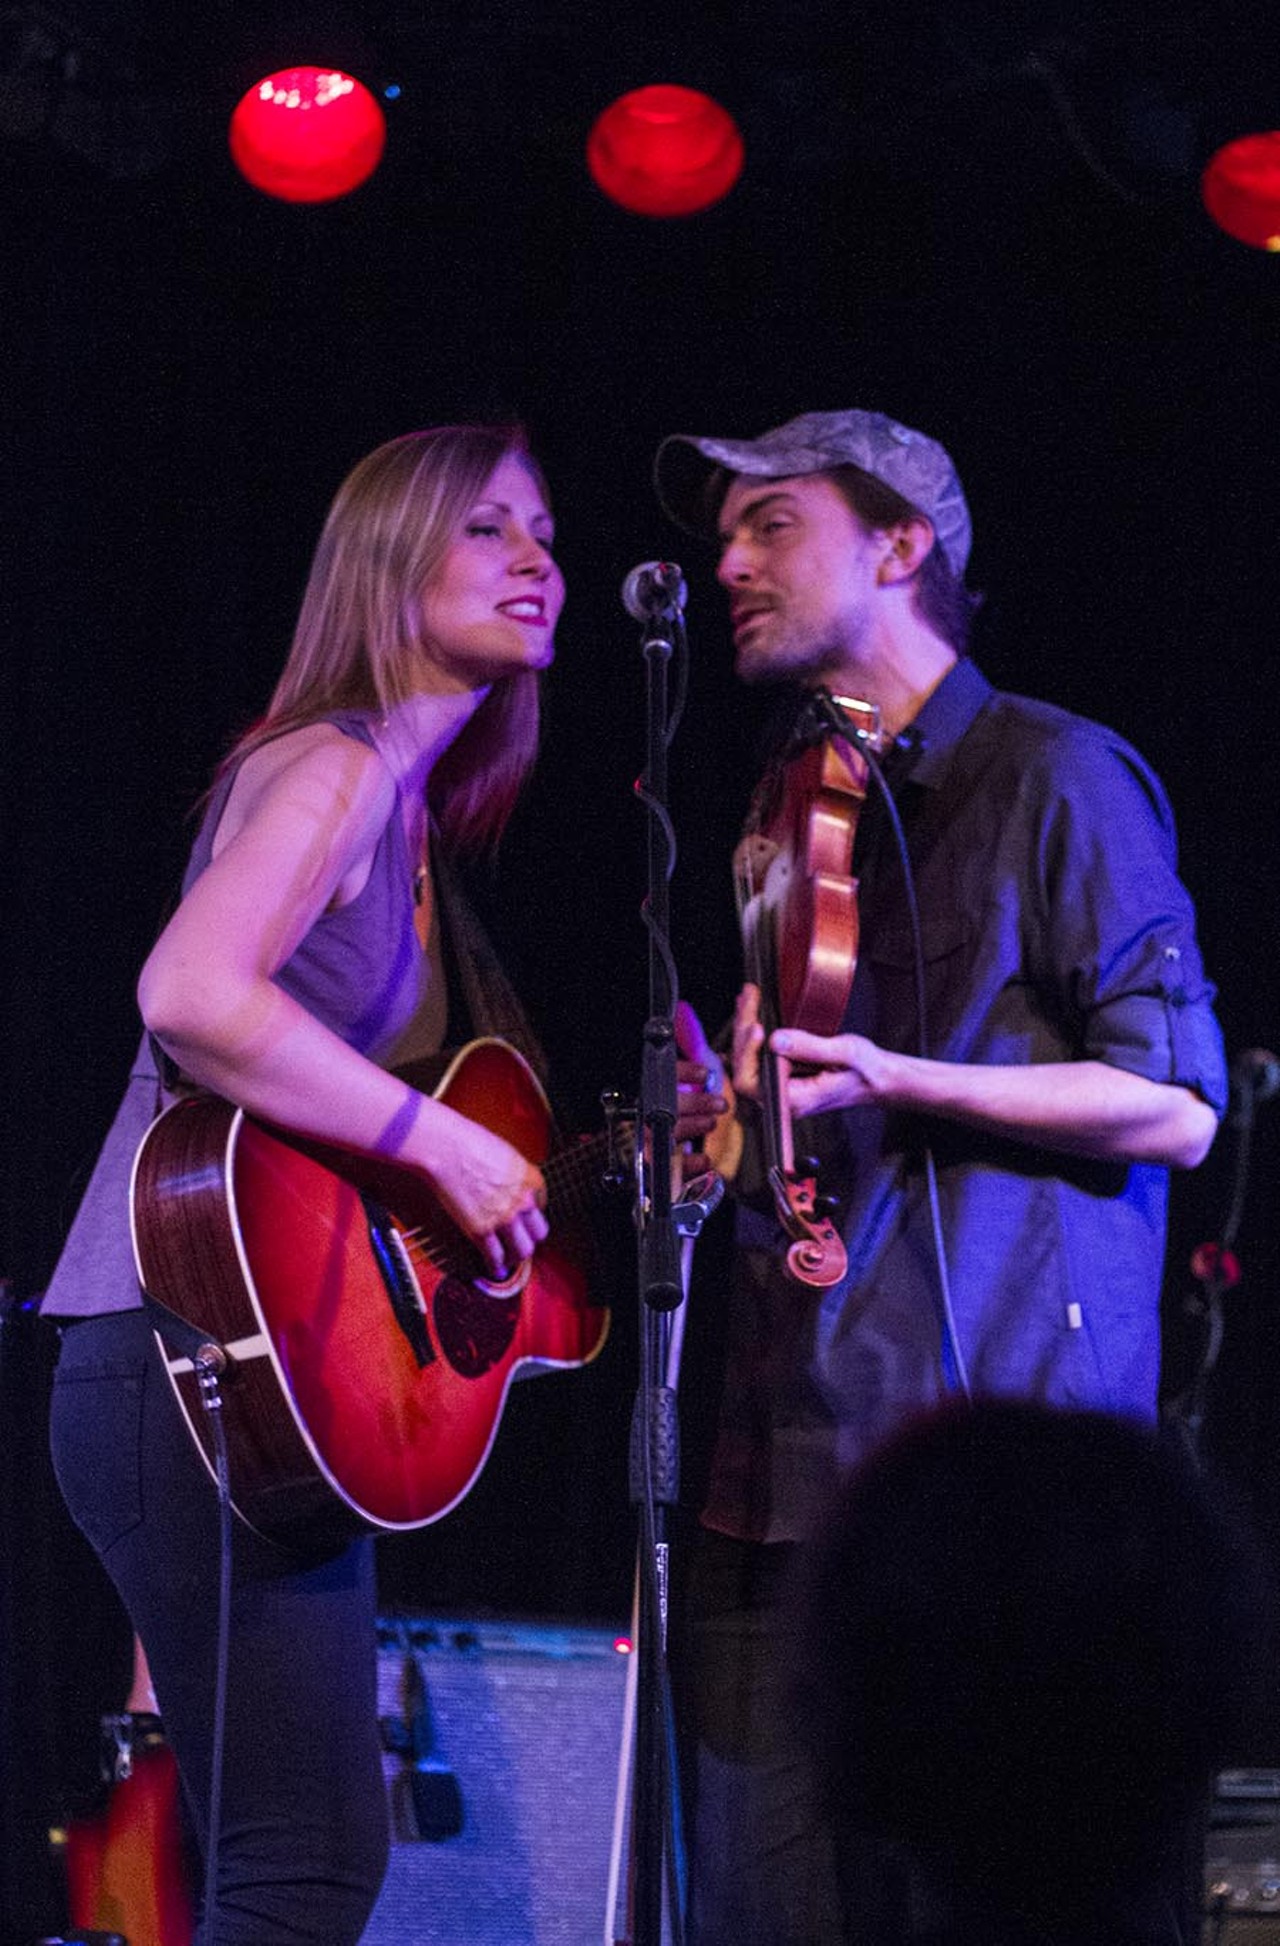 40 photos from Nora Jane Struthers at The Ark